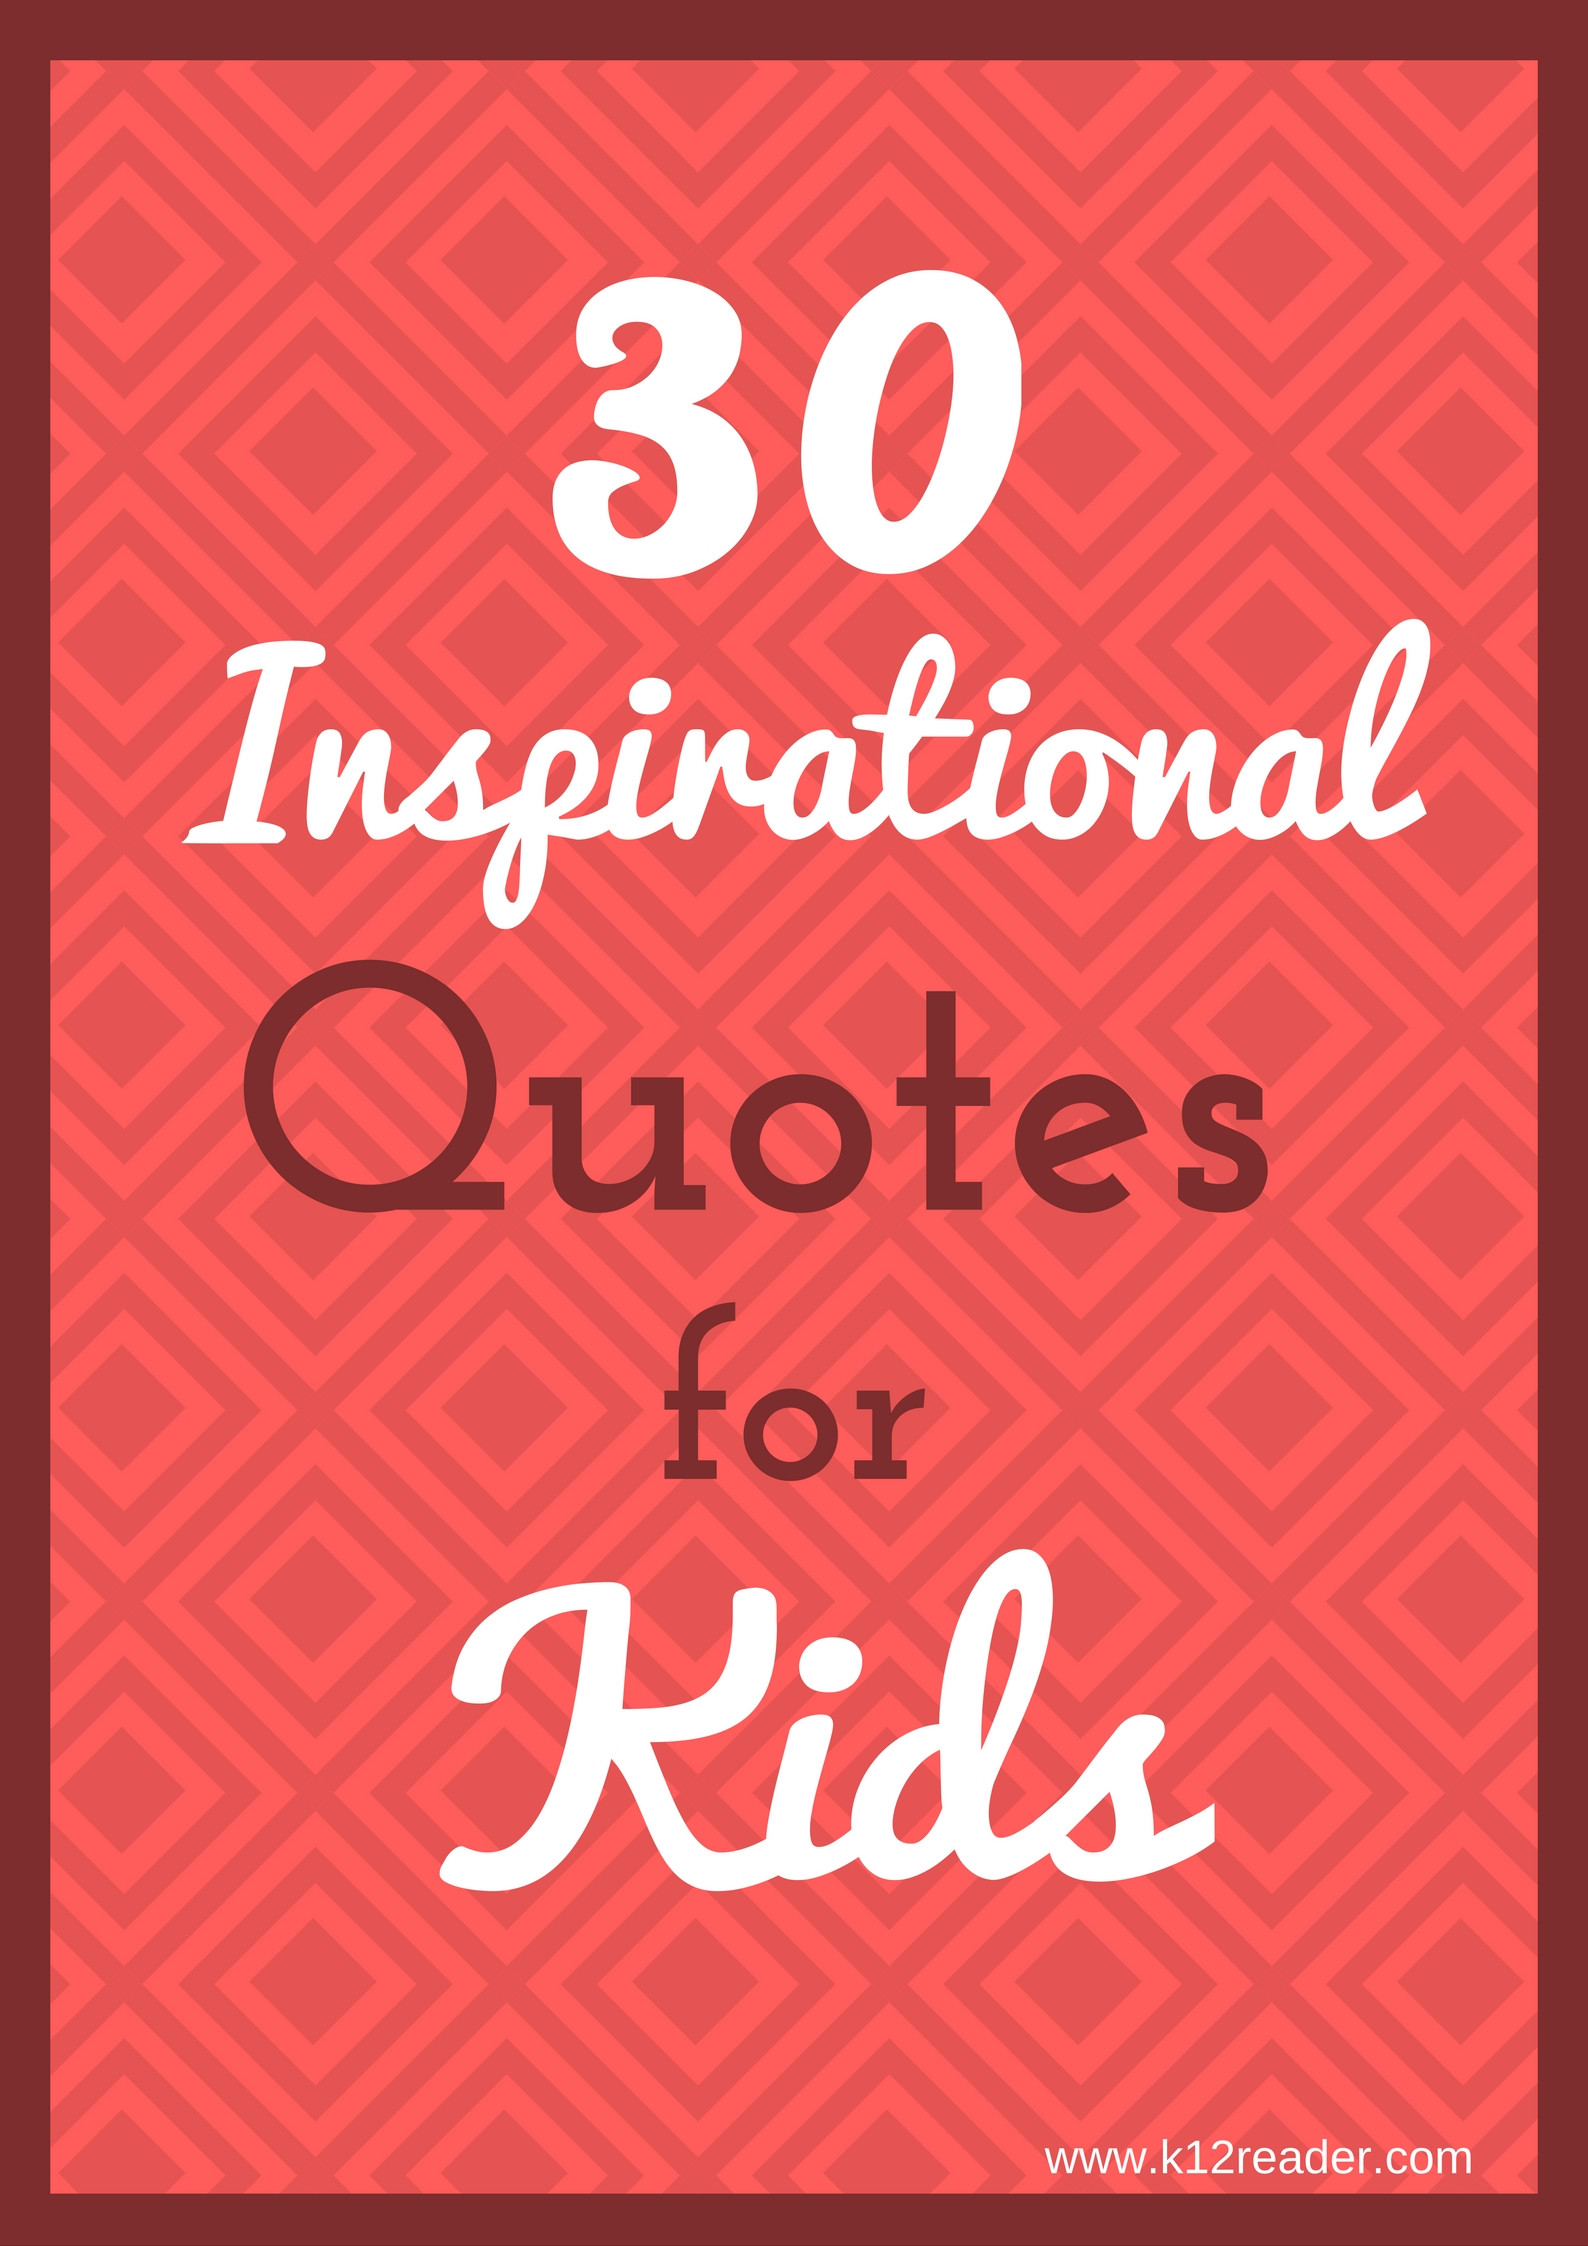 Motivational Quotes For Kids
 30 Inspirational Quotes for Kids